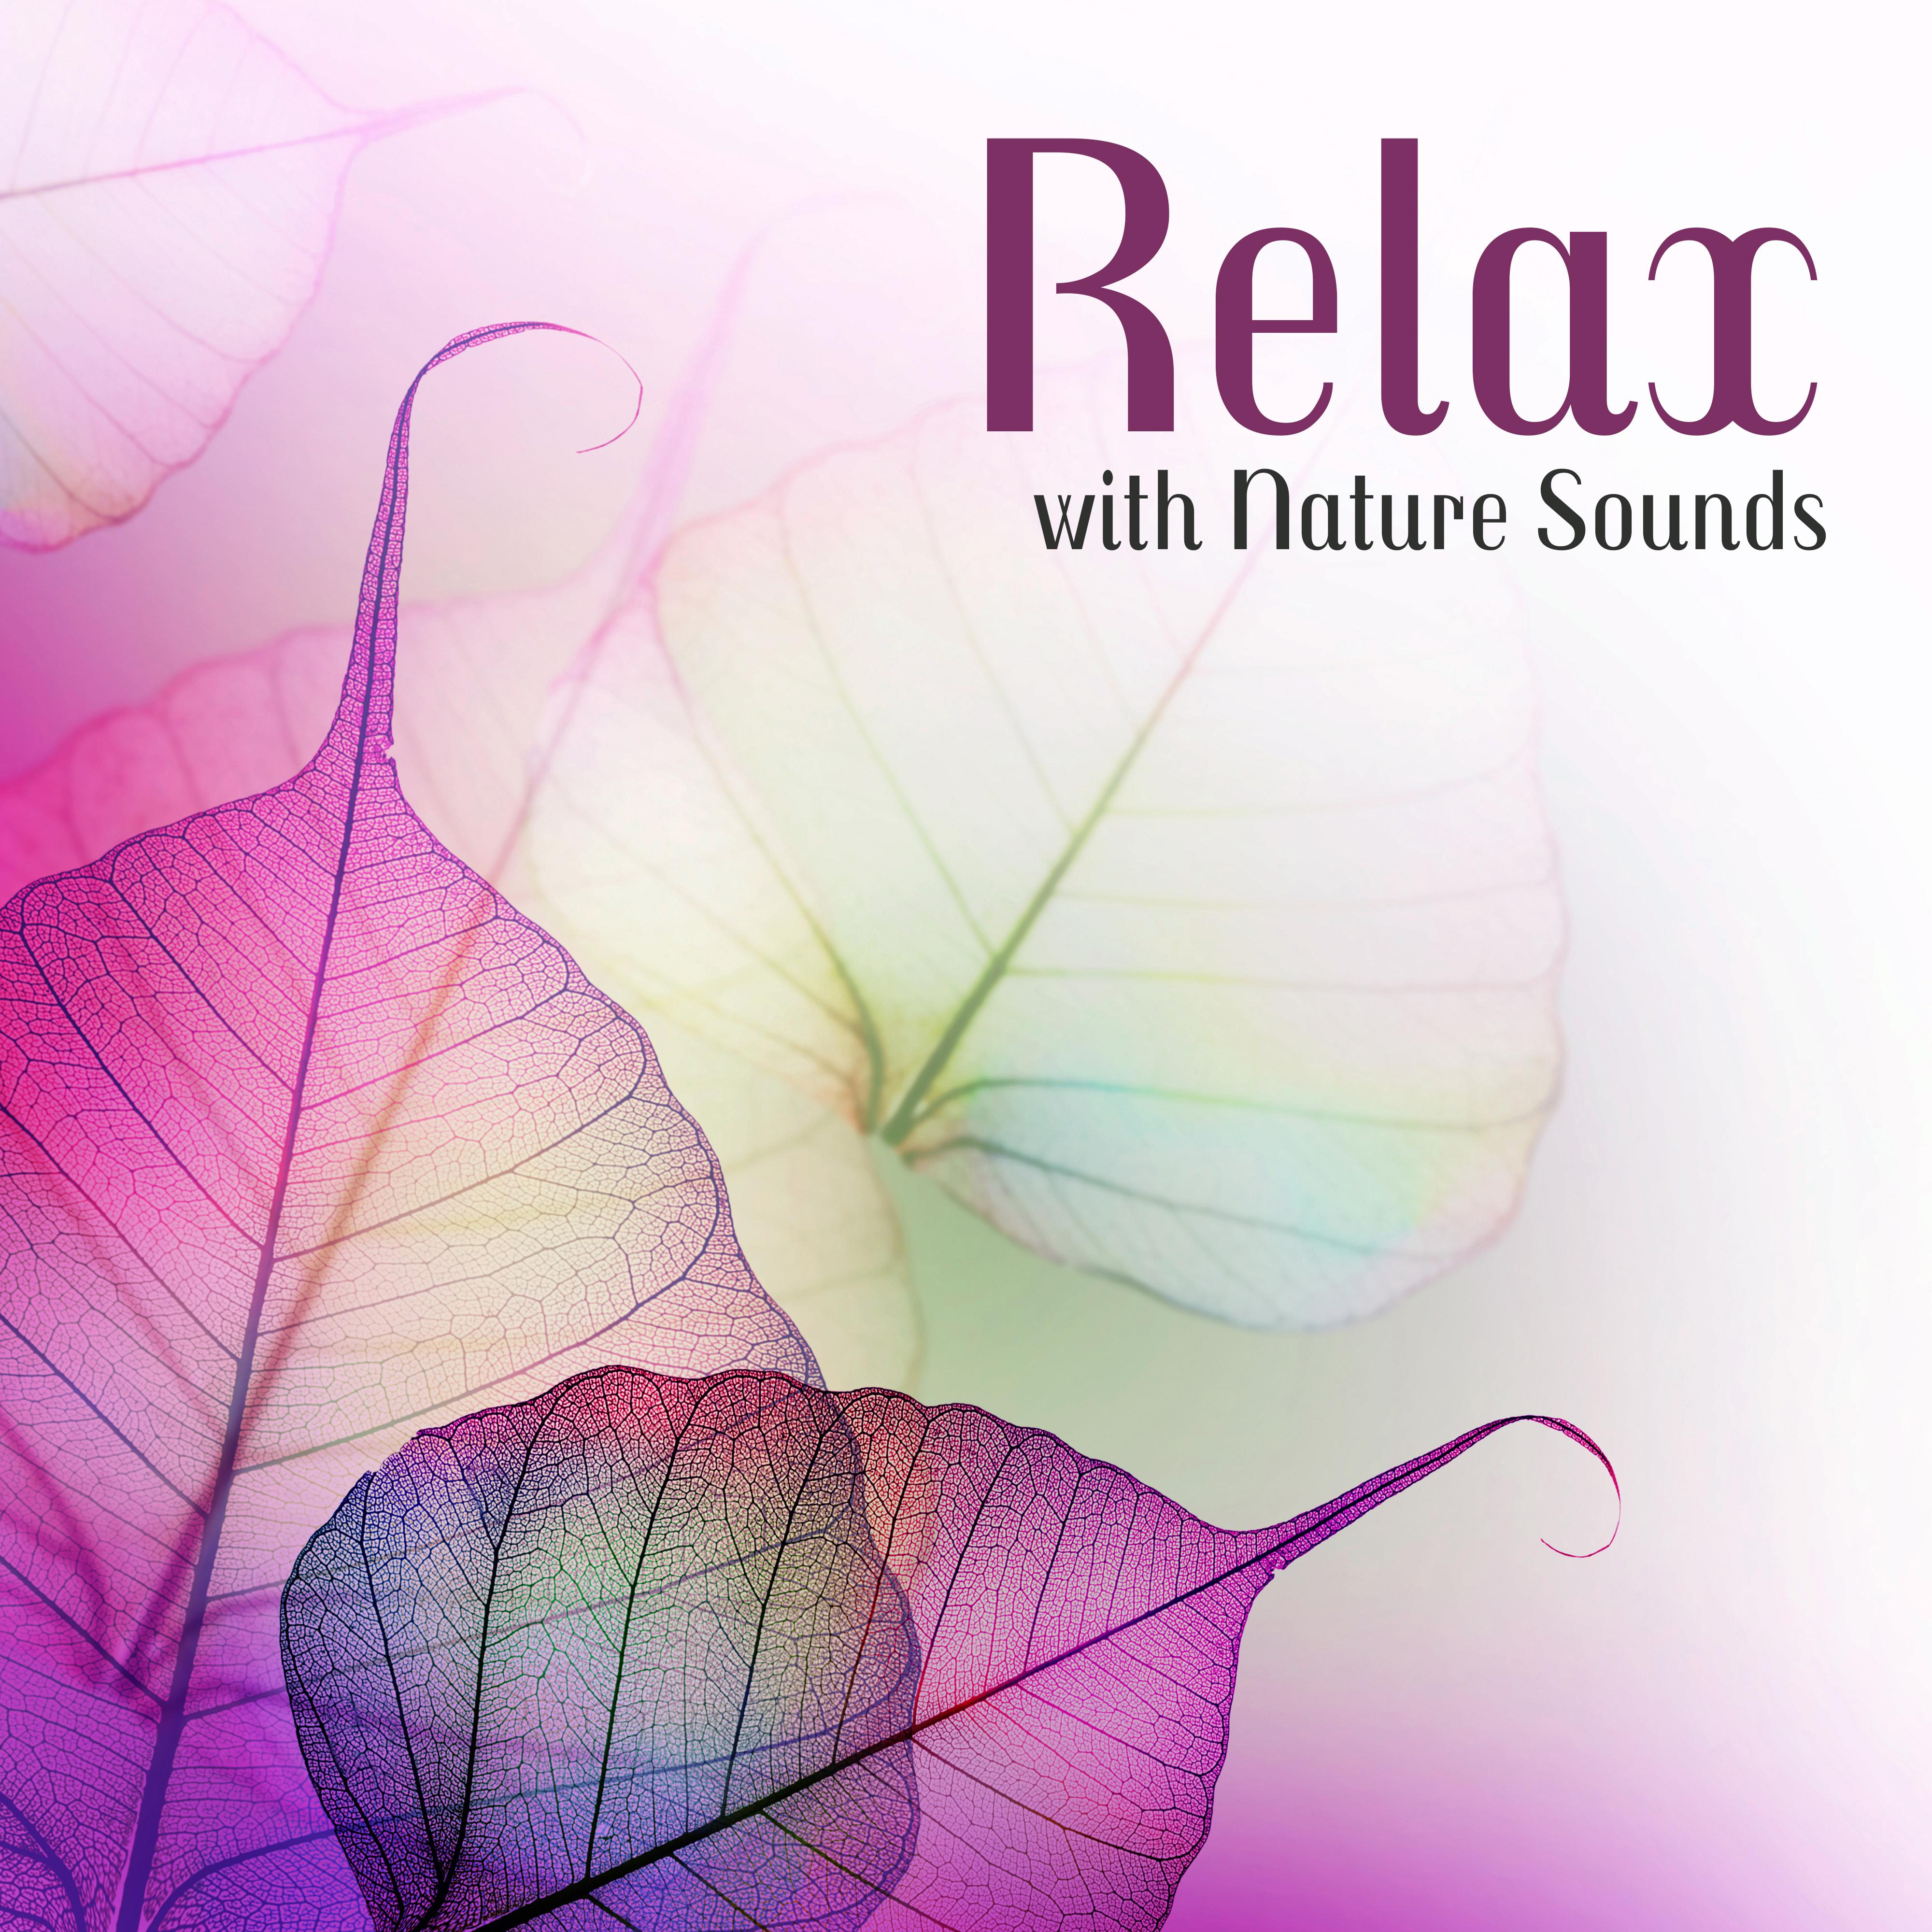 Relax with Nature Sounds